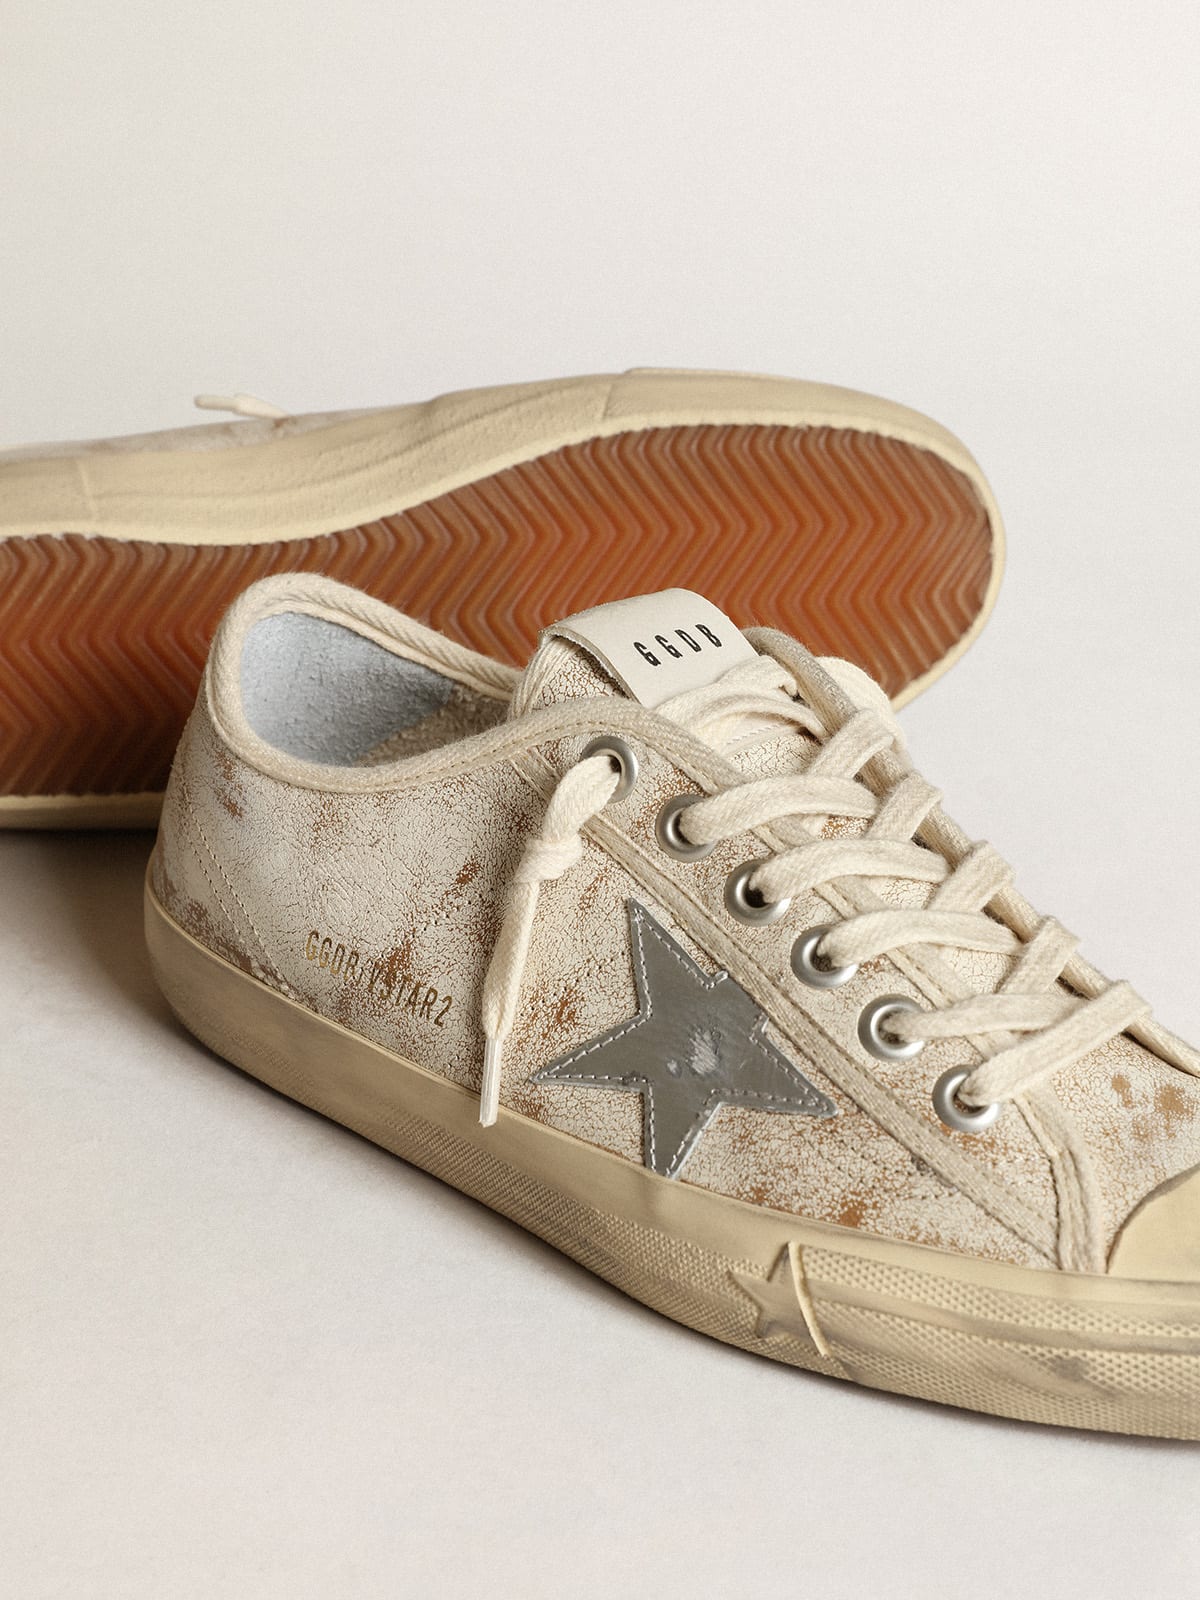 Golden Goose - Women's V-Star white glossy leather with silver leather star in 